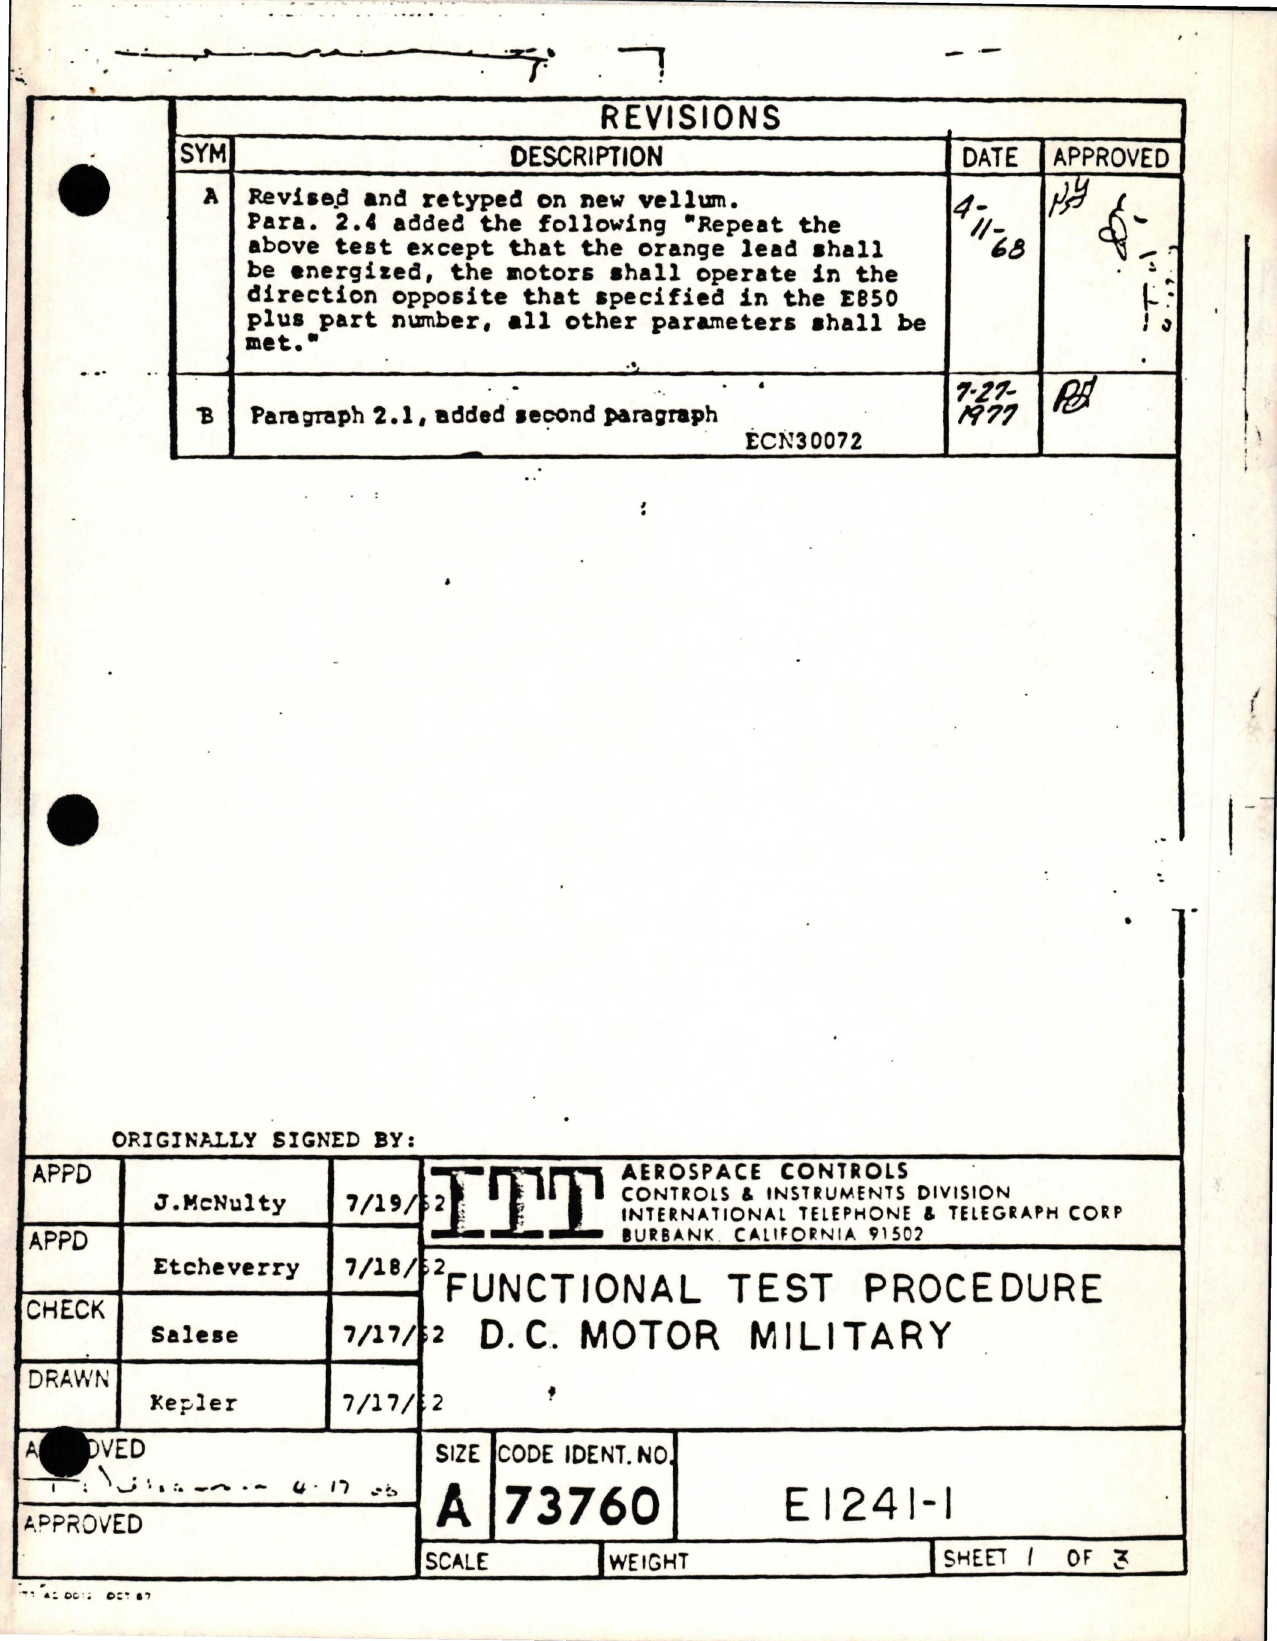 Sample page 1 from AirCorps Library document: Functional Test Procedure for Military DC Motor 